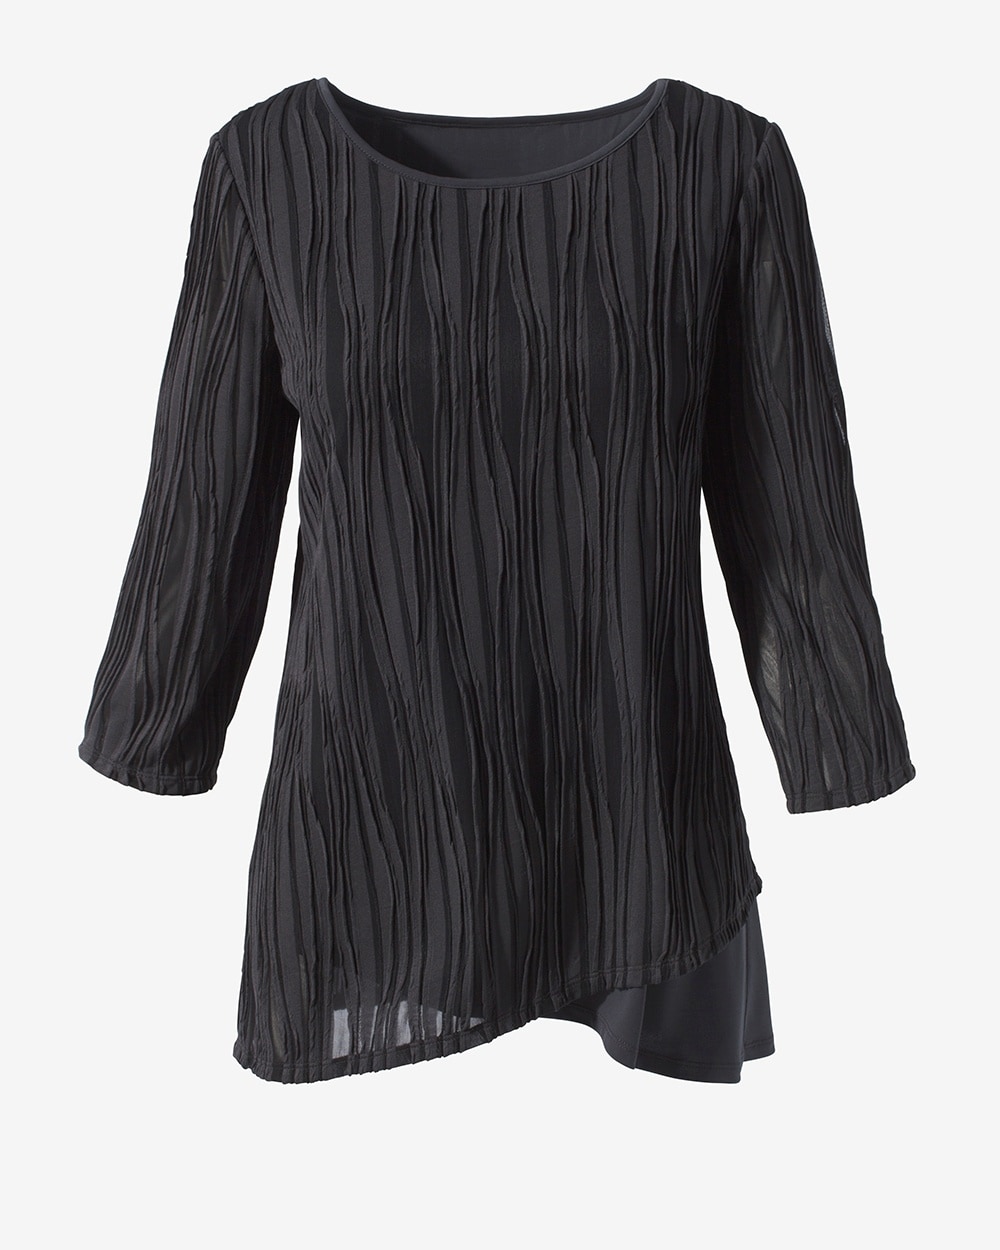 Easywear Textured Layers Fabric Mix Tunic